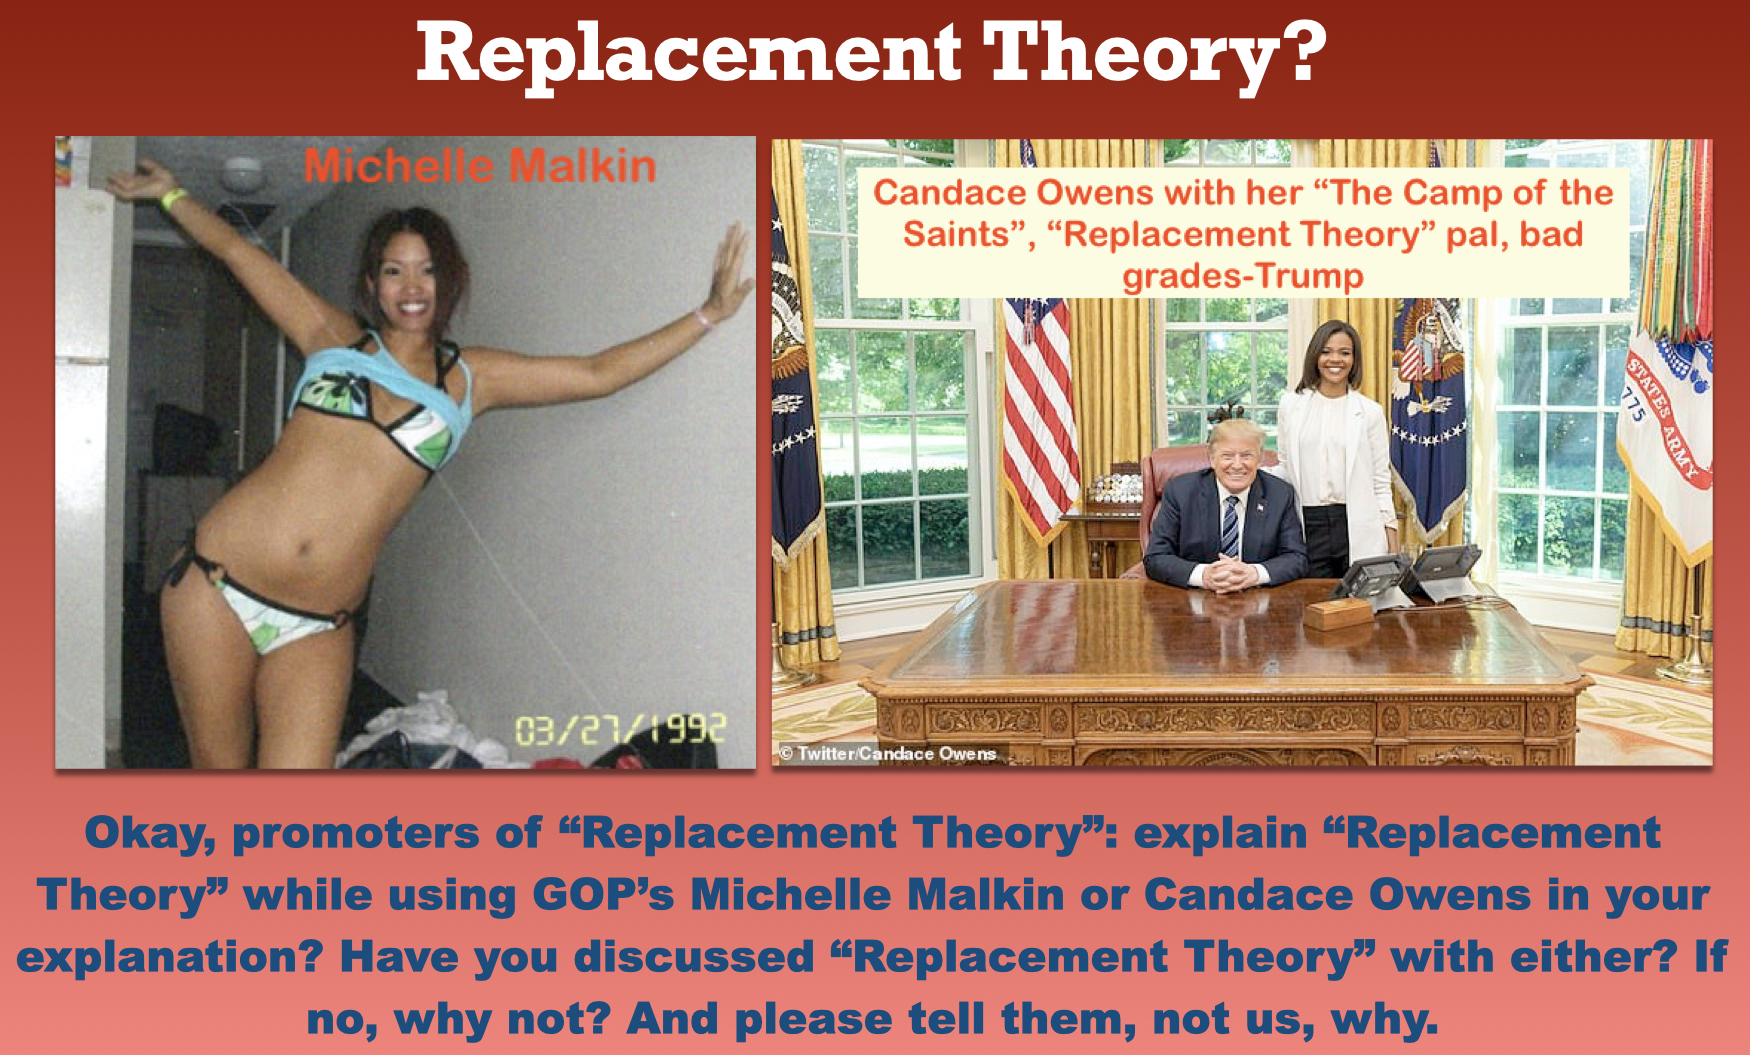 Internalized Racists and Replacement Theory Supporters